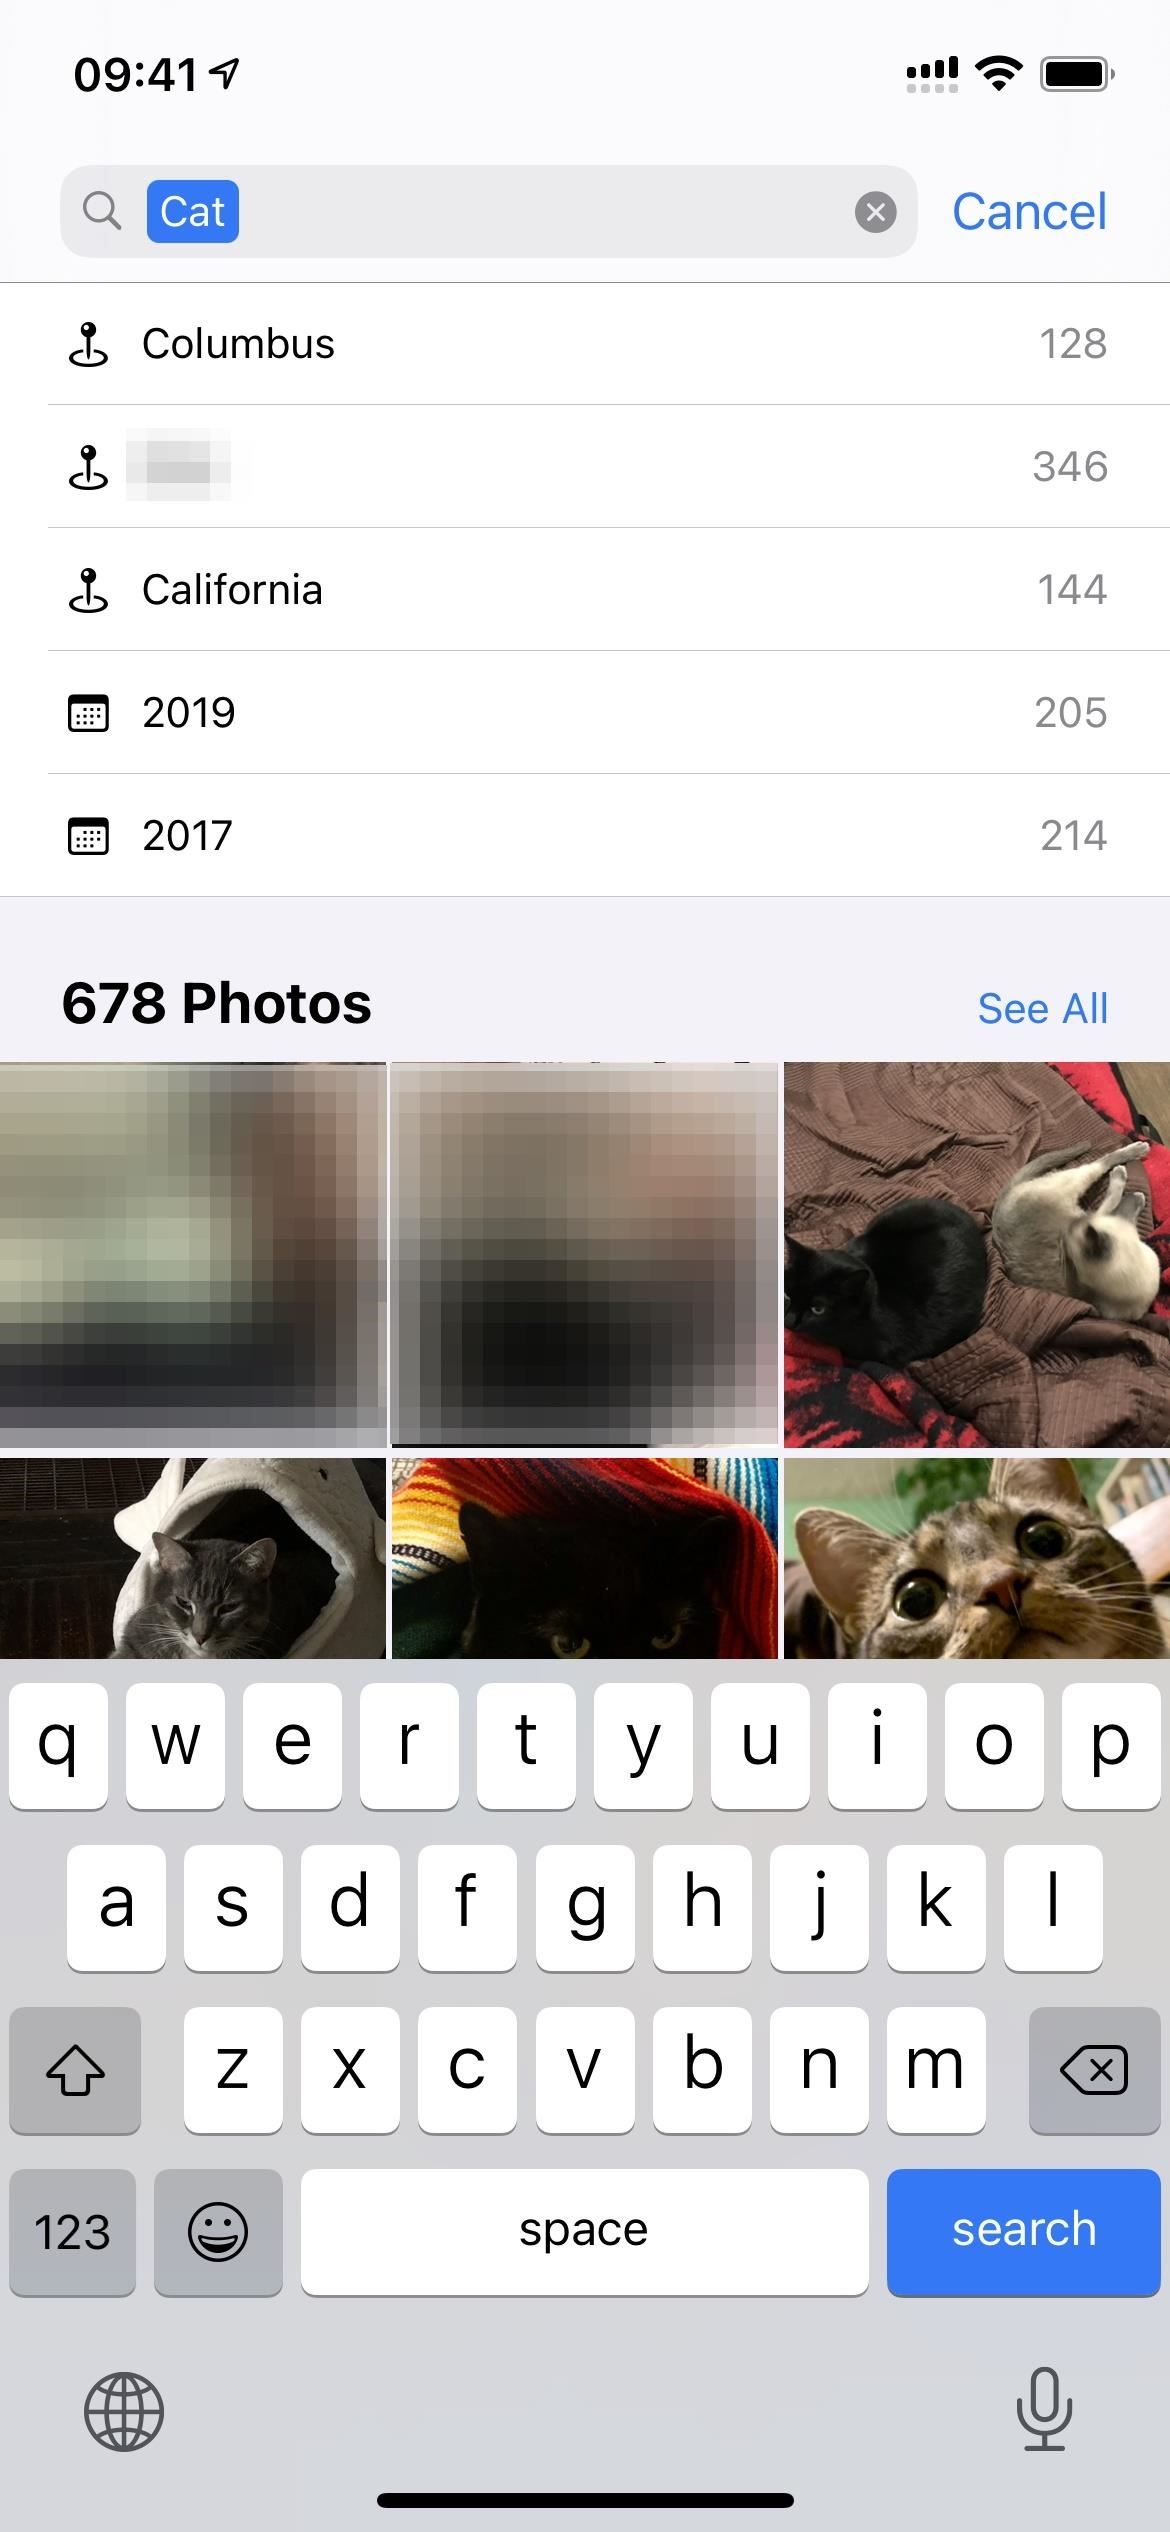 7 Search Tips You Need to Know to Find Specific Photos & Videos Faster on Your iPhone